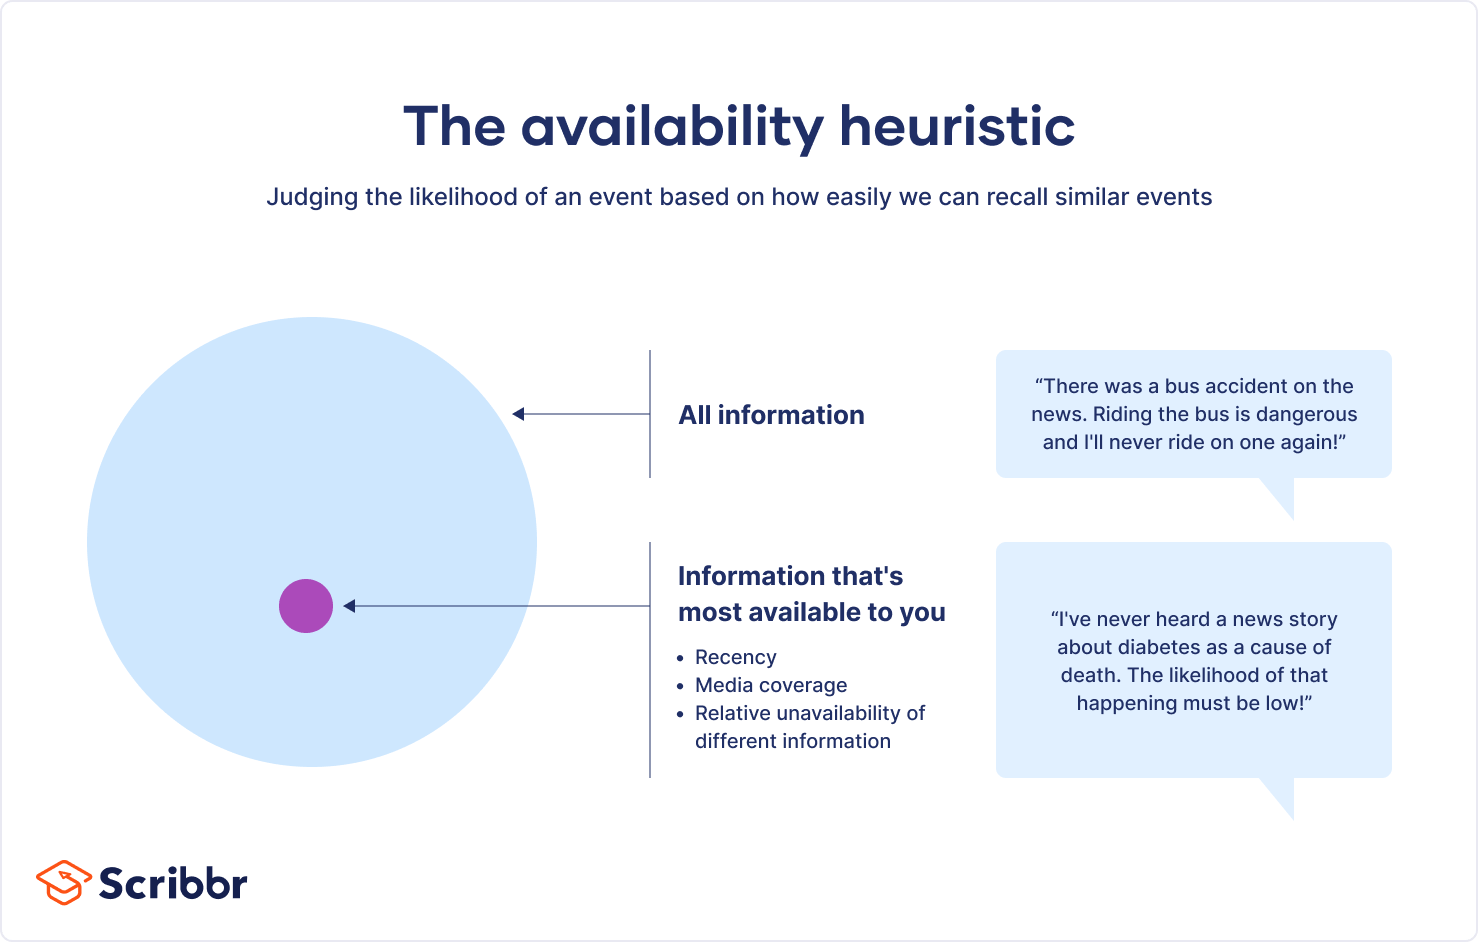 What is the availability heuristic?